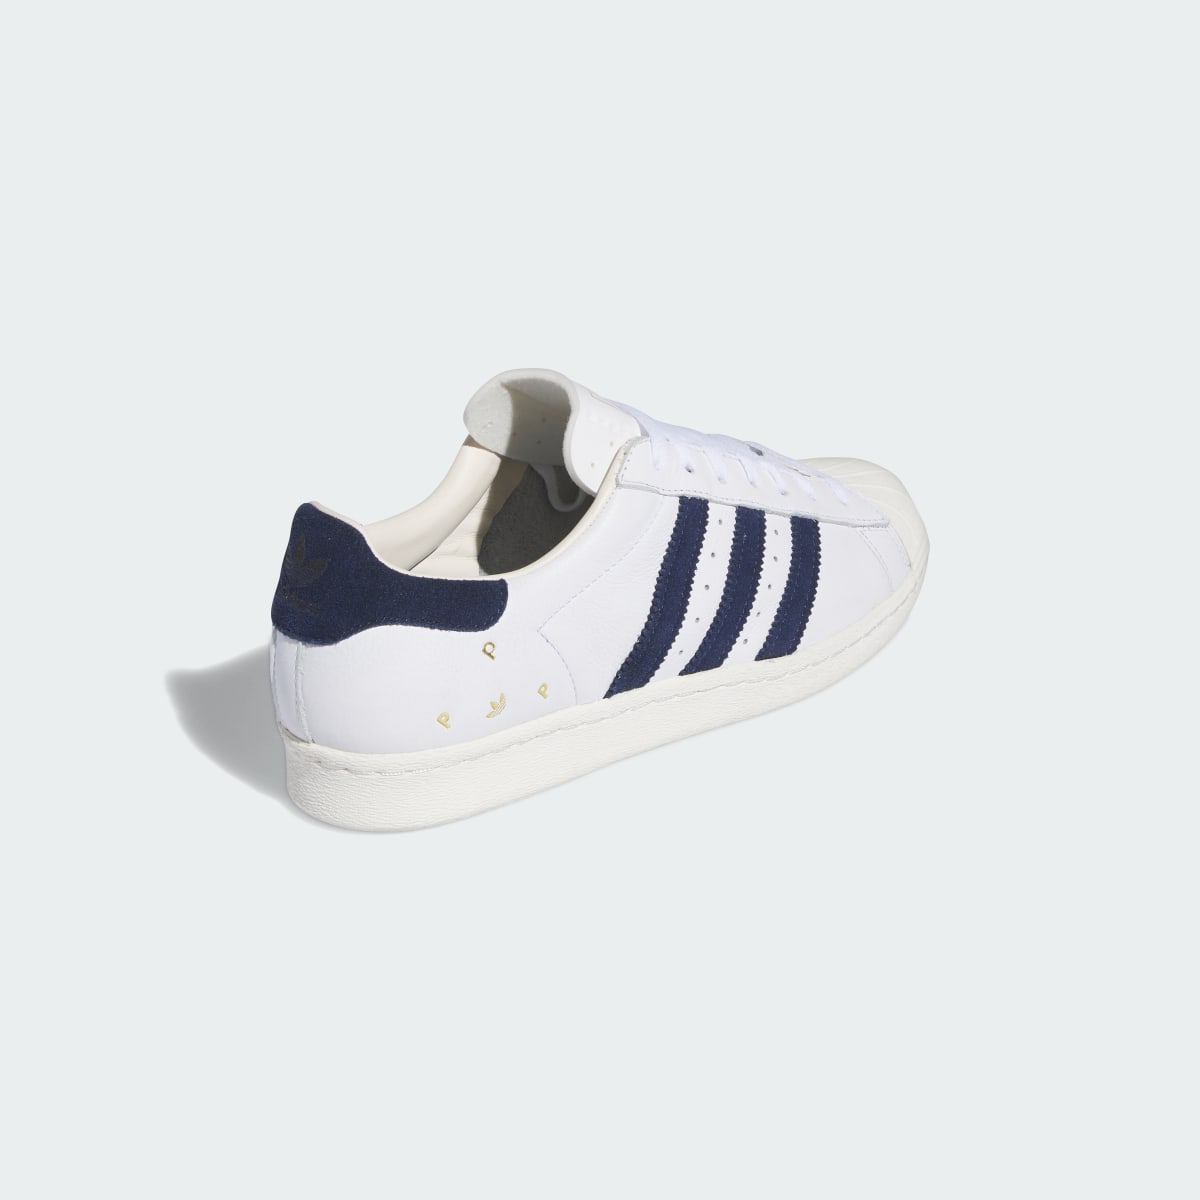 Adidas Pop Trading Co Superstar ADV Trainers. 7